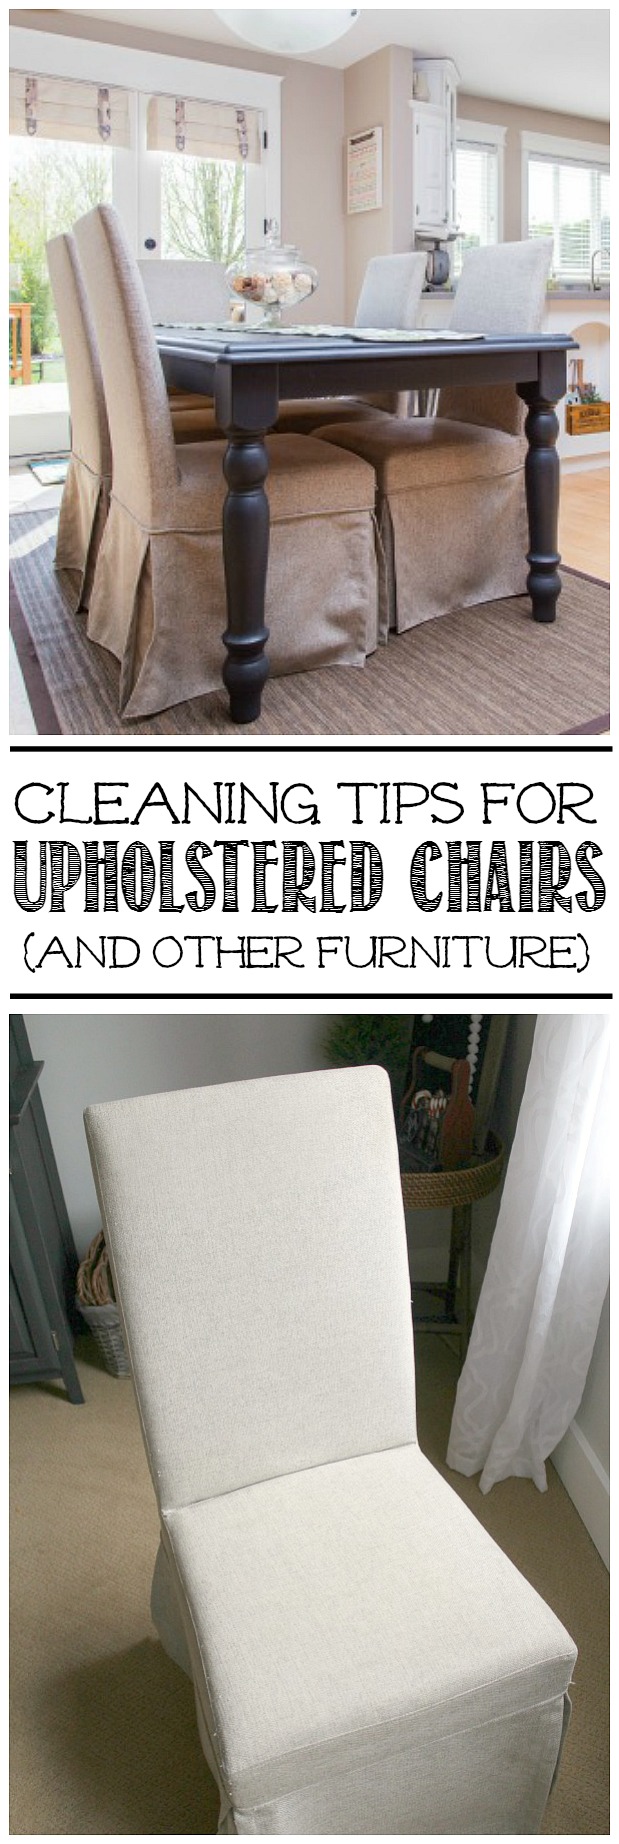 How To Clean Upholstered Chairs, How To Deep Clean Fabric Dining Chairs